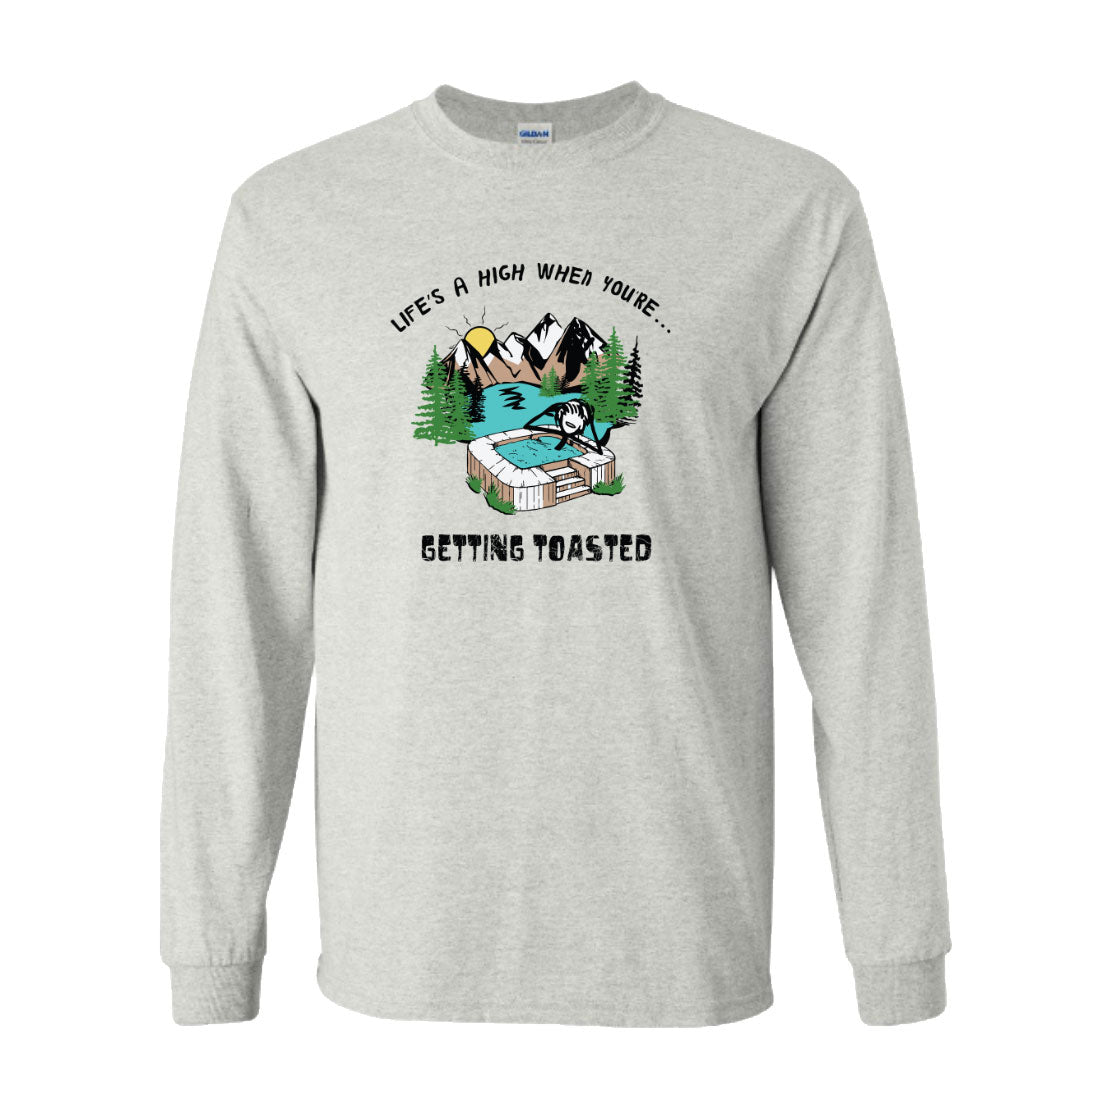 Getting Toasted Long Sleeve Shirt